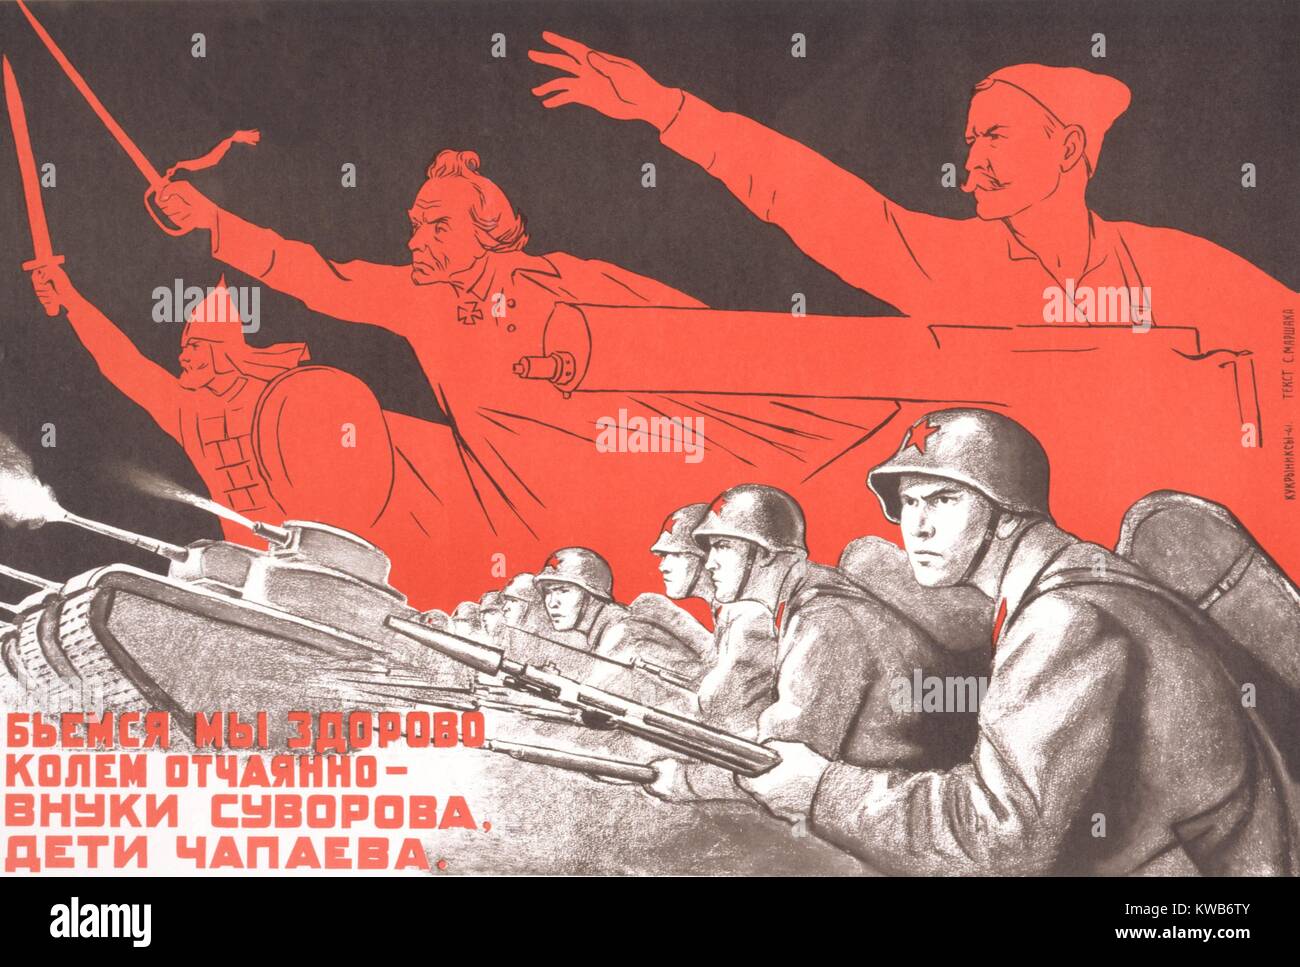 Soviet World War 2 poster by Kukryniksy, 1941. 'We will fight strongly, strike desperately grandsons of Suvorov, children of Chapaev'. Legendary Russian military leaders are depicted in the background: Alexander Nevsky, Alexander Suvorov, and Vasily Ivanovich Chapaev. (BSLOC 2014 8 51) Stock Photo